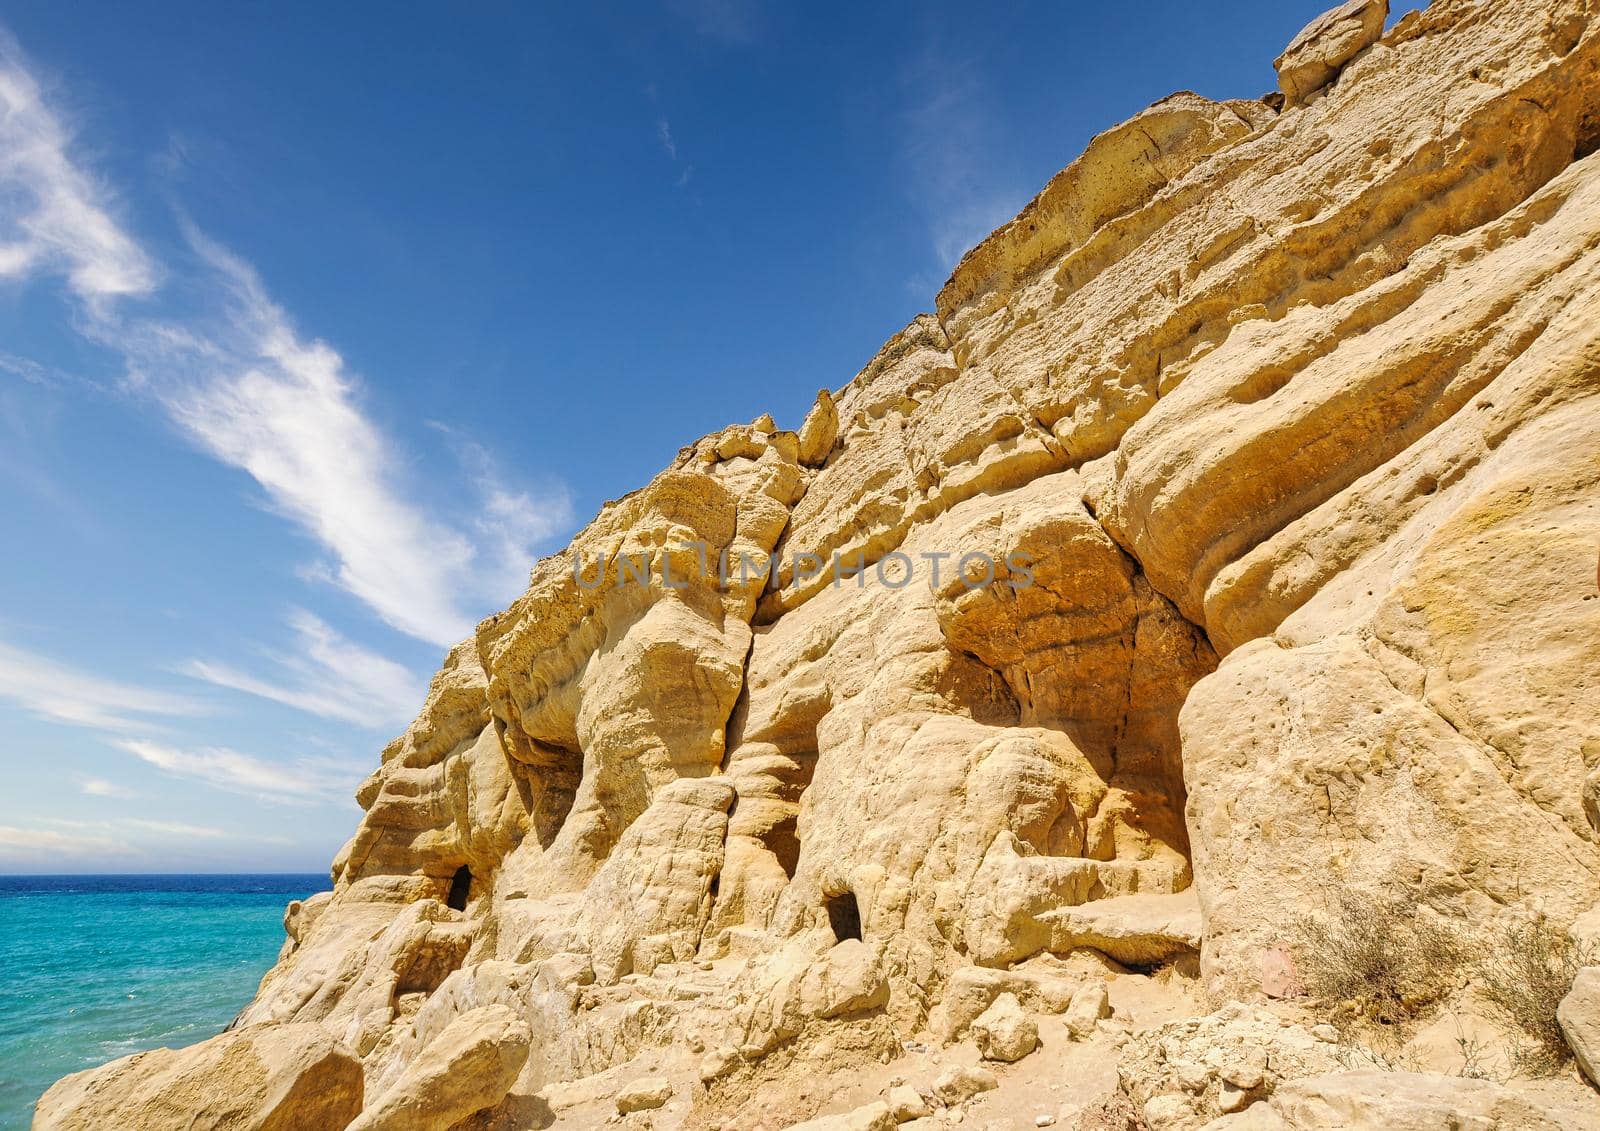 Matala beach with caves on the rocks that were used as a roman cemetery and at the decade of 70's